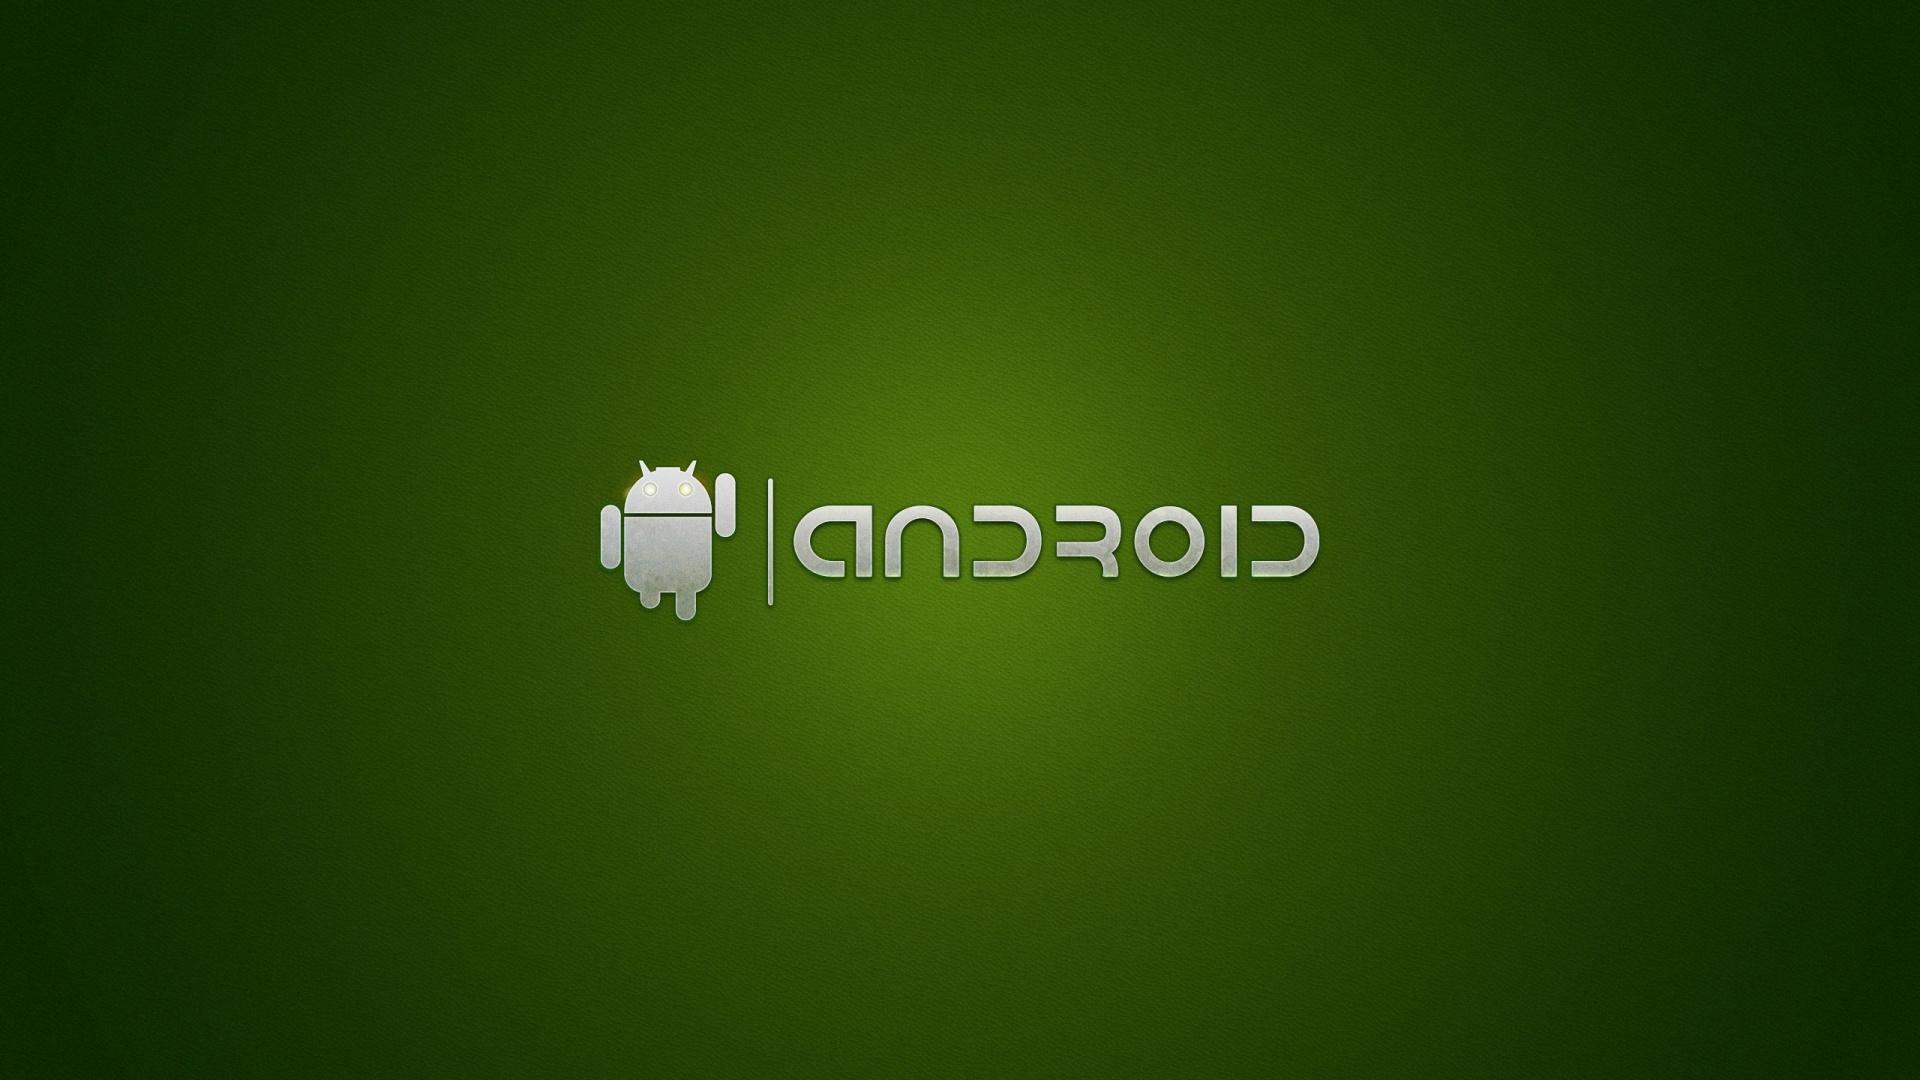 Wallpaper Dark Android Animated Green